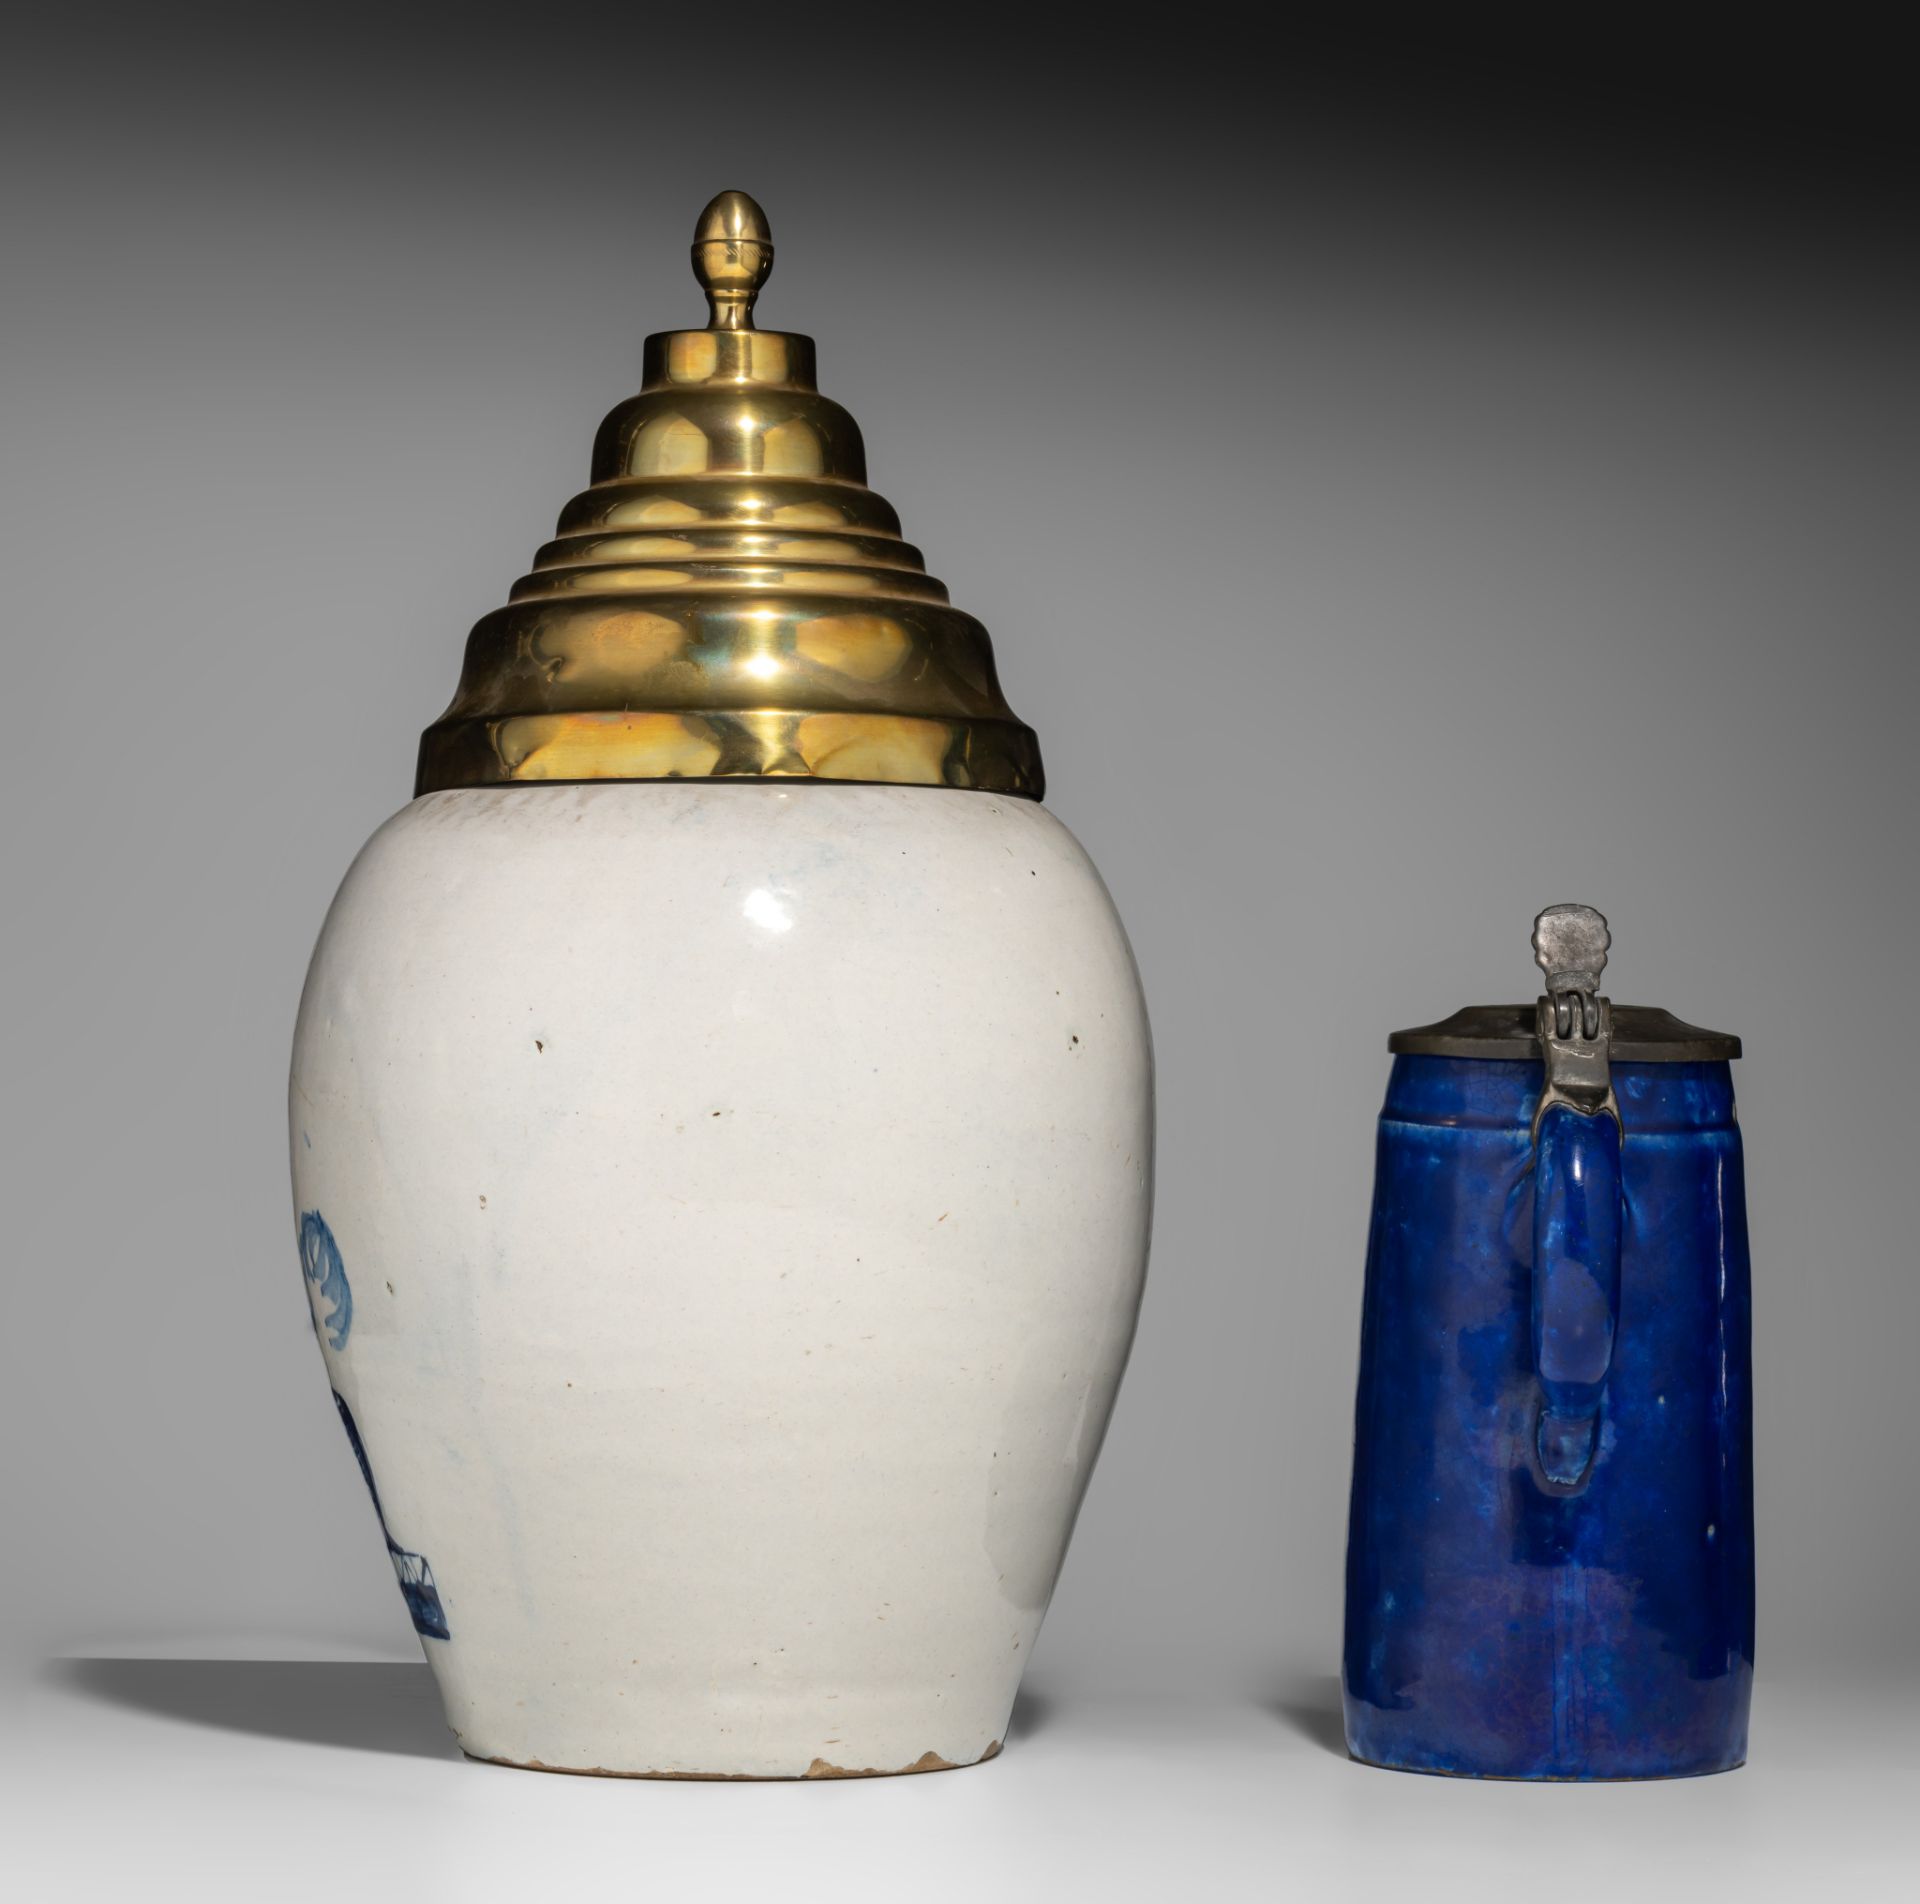 An 18thC Dutch Delft tobacco jar and an early 19thC Brussels one-litre jar, H 21,5 - 39 cm - Image 4 of 8